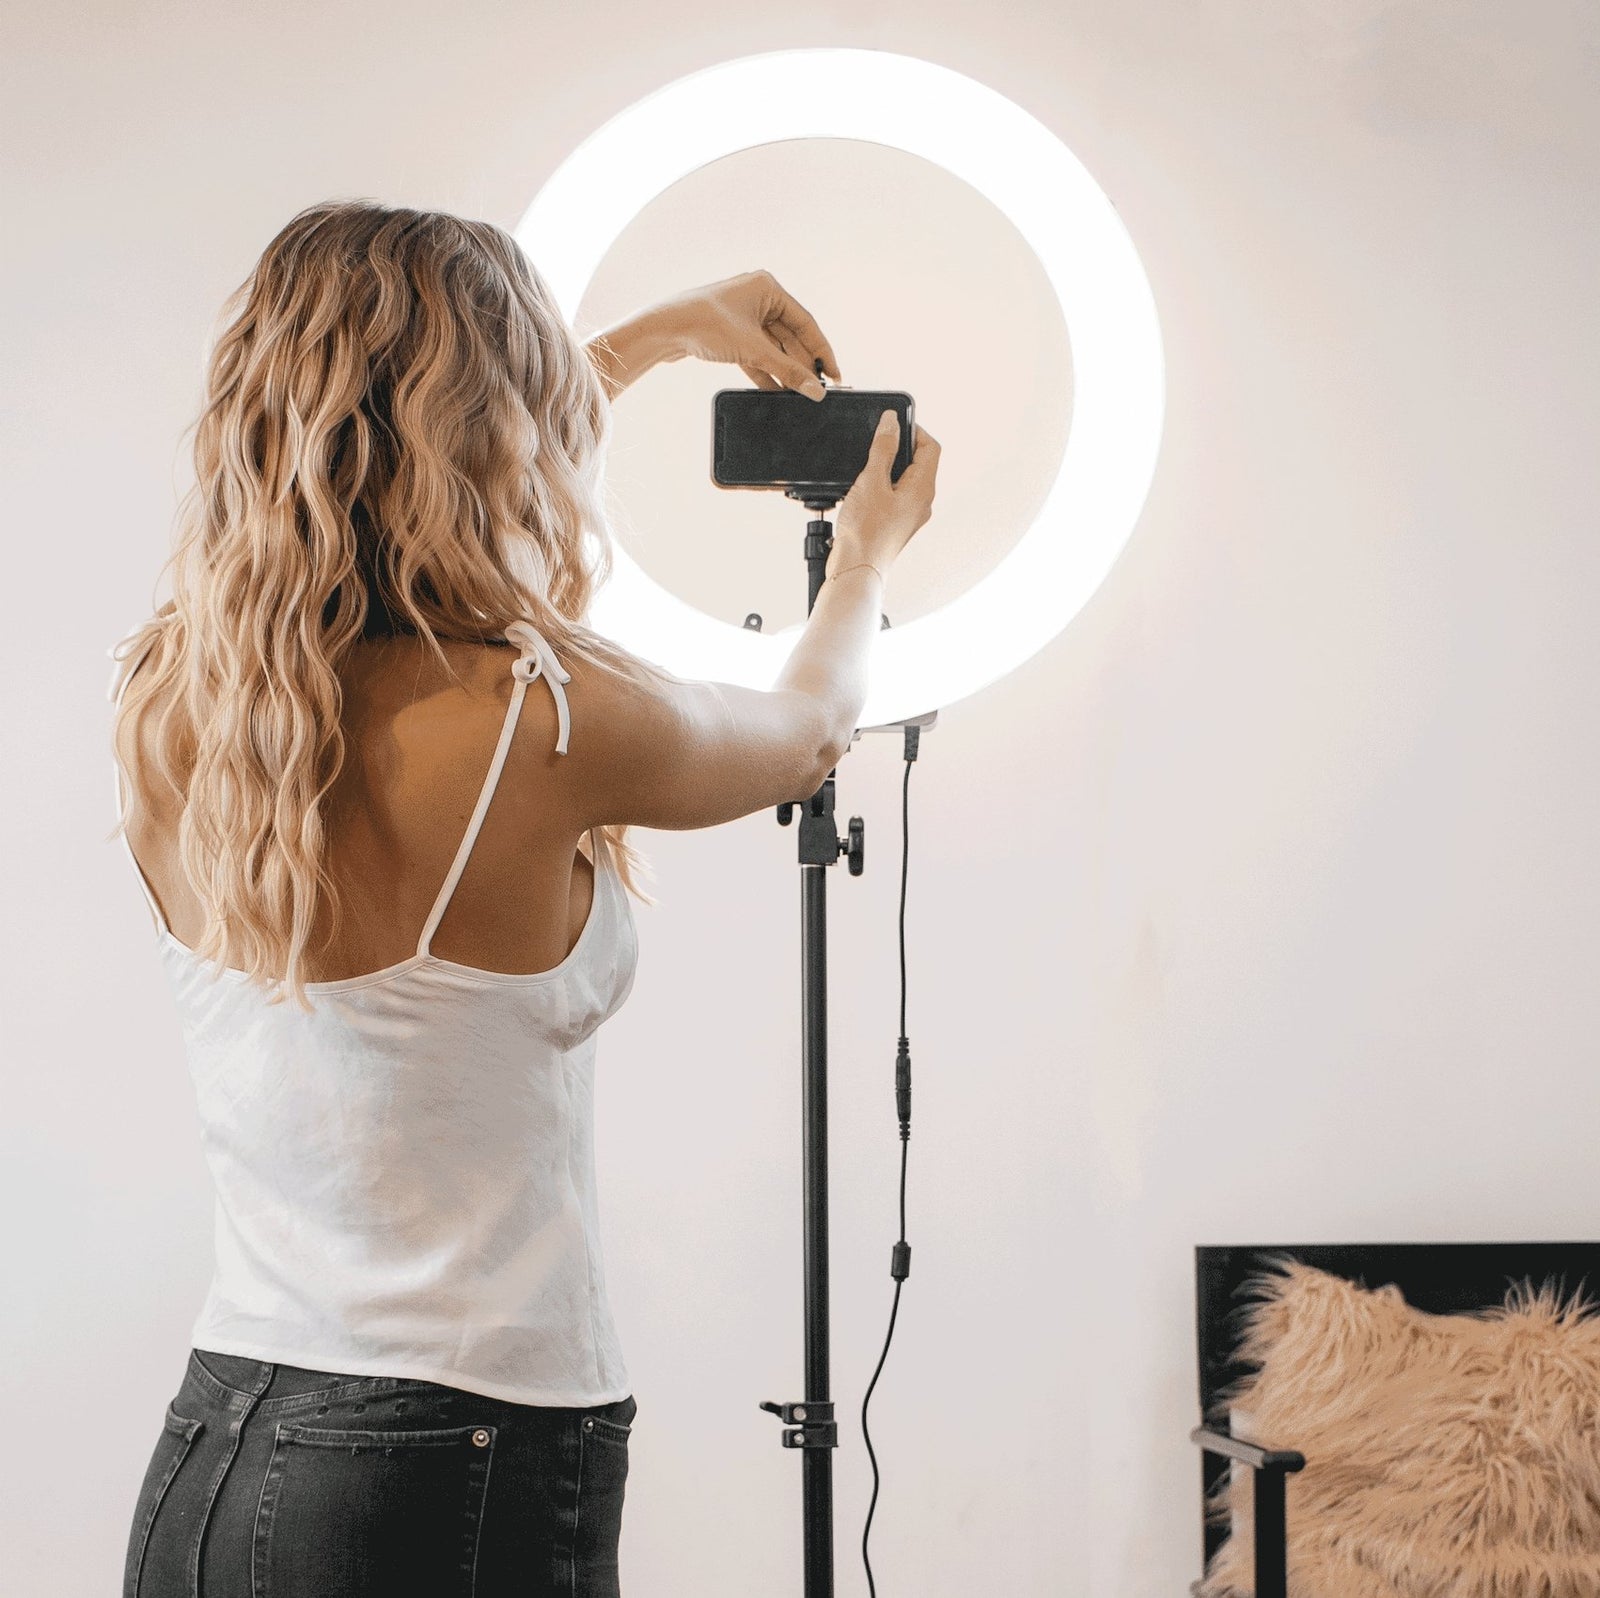 Are Ring Lights Good For Product Photography? – Replica Surfaces